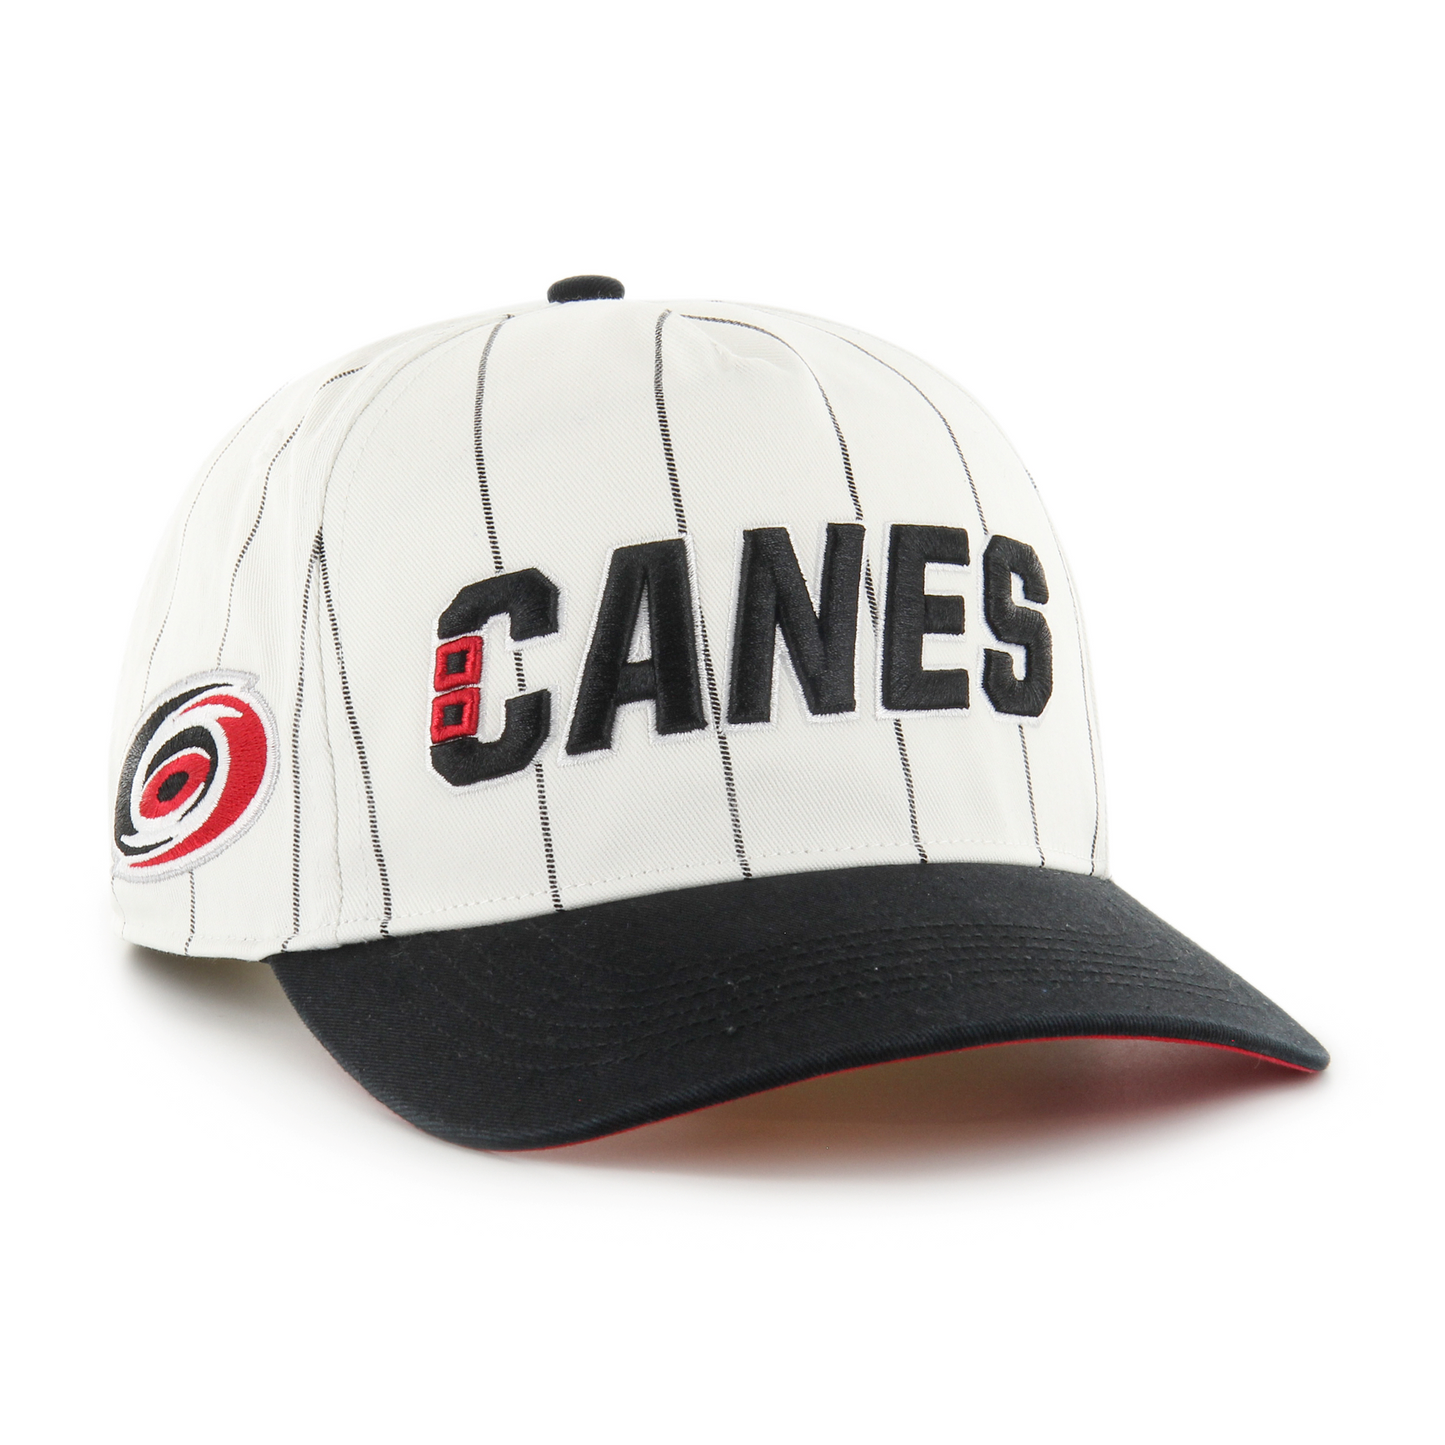 Front: Baseball cap white with black pin stripes canes wordmark and a black brim, canes primary logo on left side